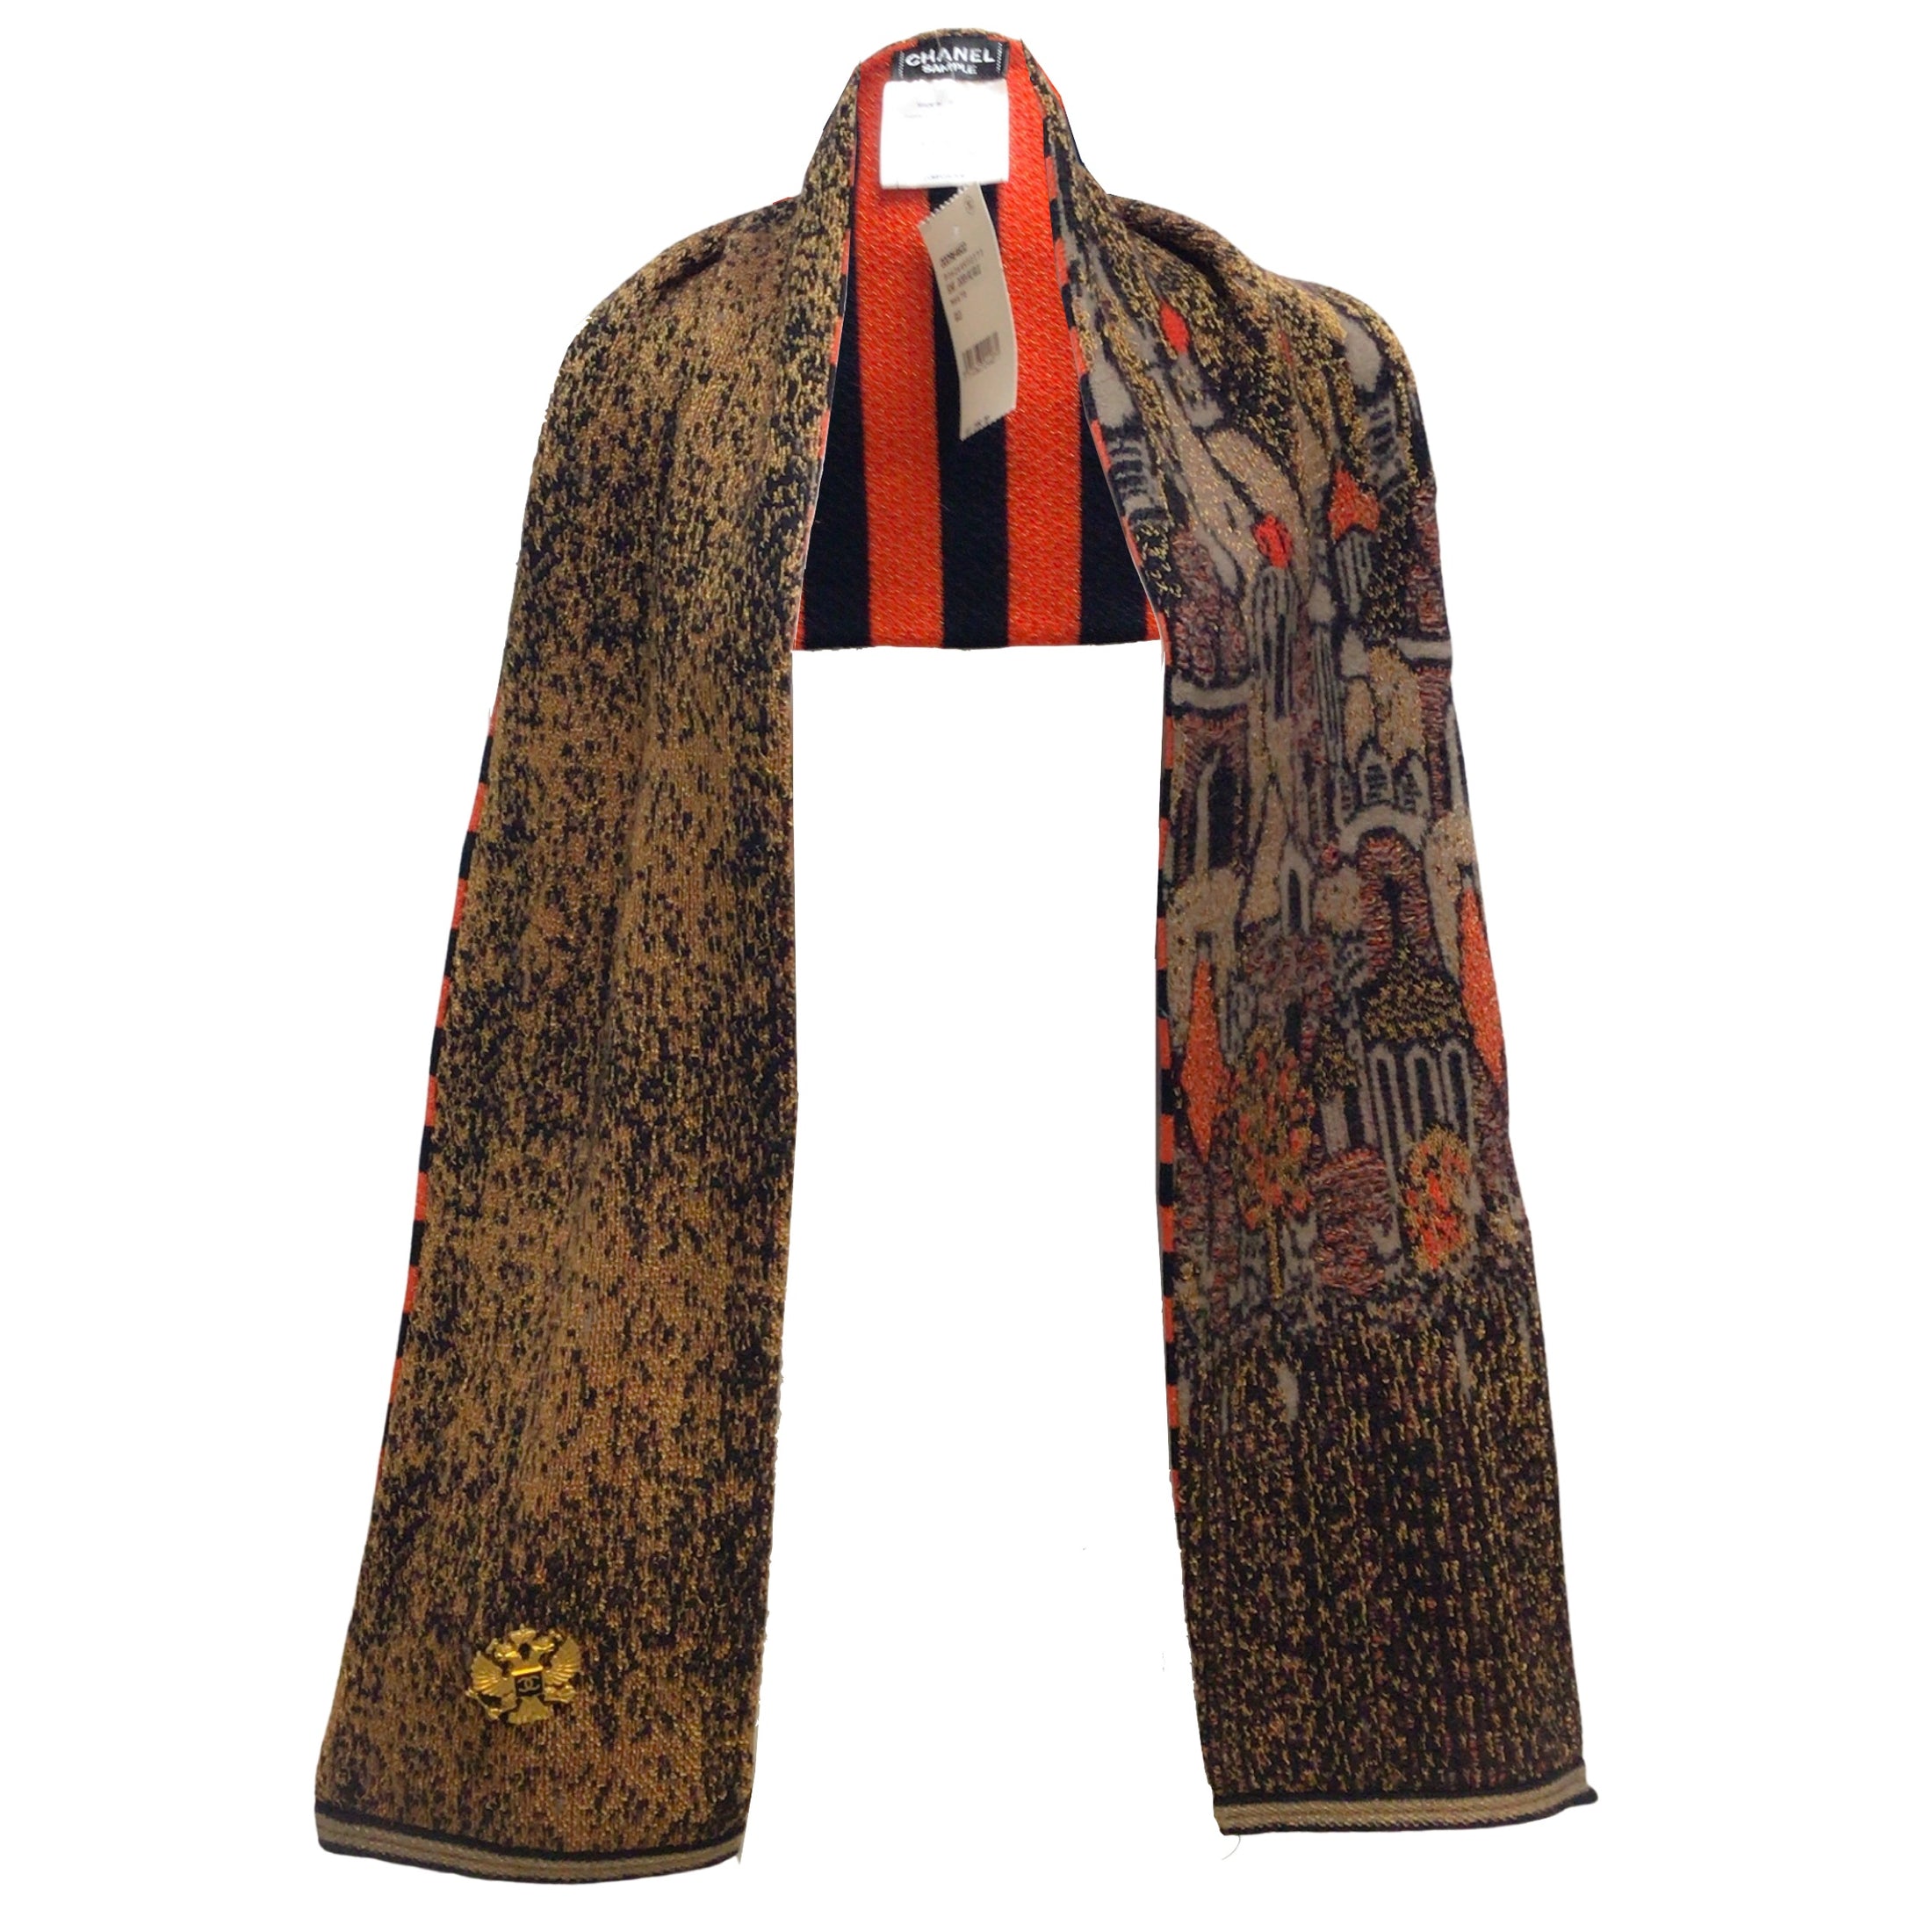 Chanel Gold Metallic Multi 2009 Paris Moscow Cc Logo Medallion Wool and Cashmere Knit Long Scarf/Wrap